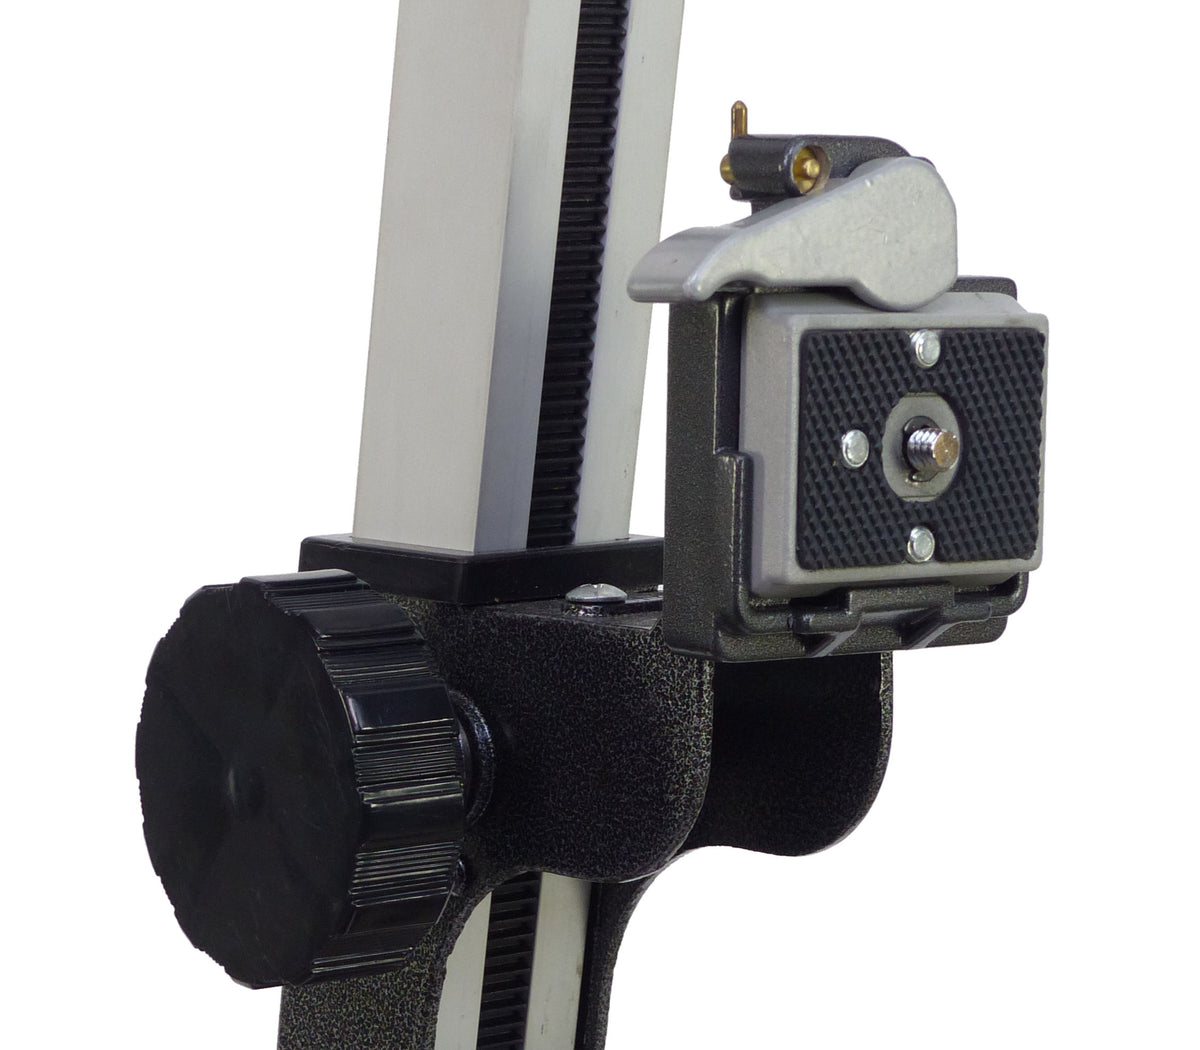 Alzo Horizontal Camera Mount, Tripod Accessory for Overhead Product Photography